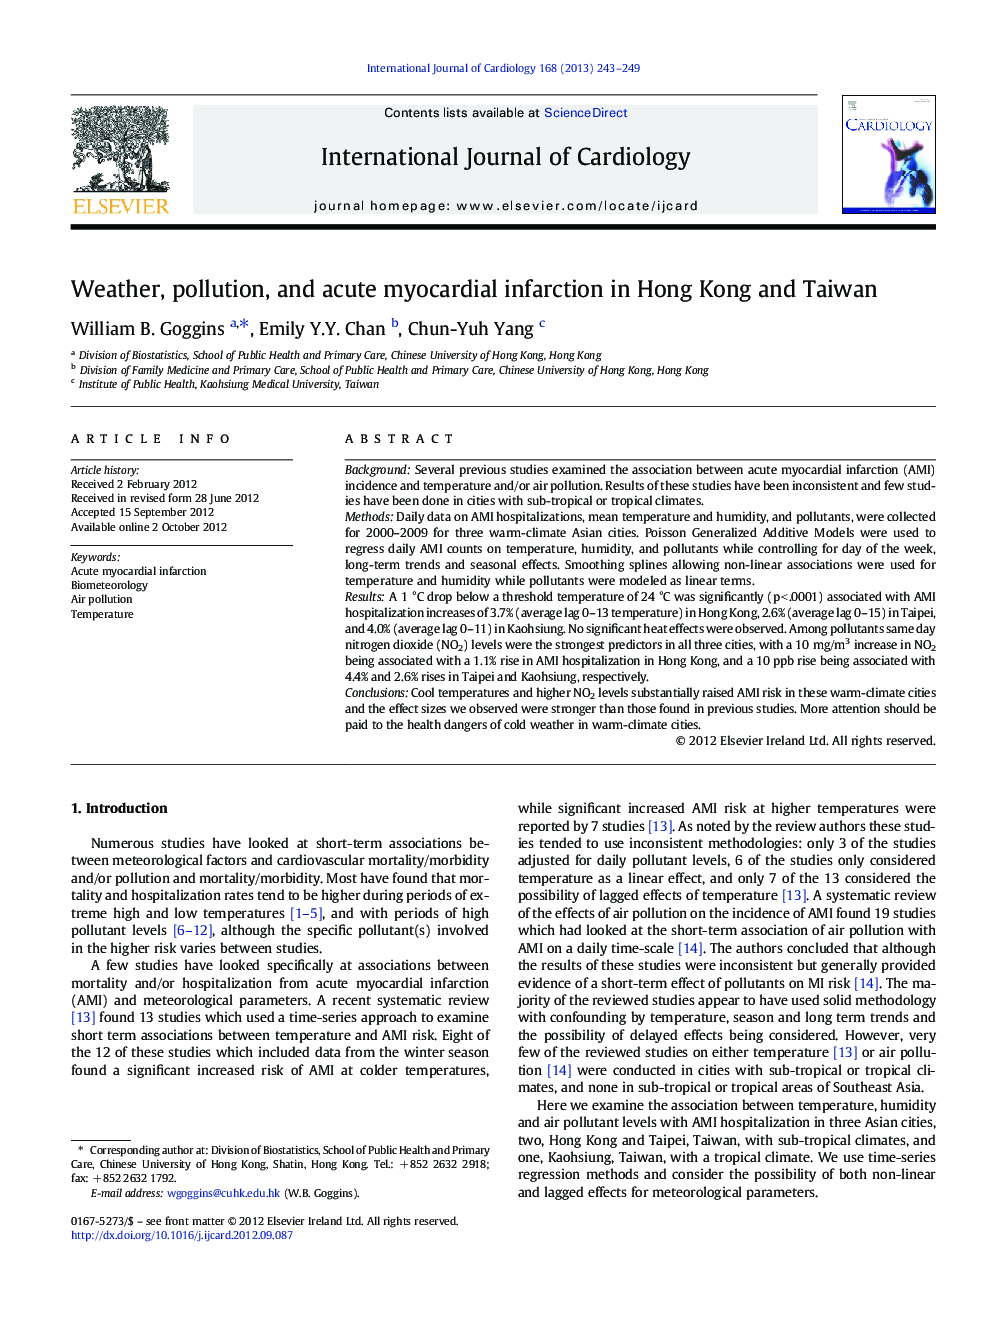 Weather, pollution, and acute myocardial infarction in Hong Kong and Taiwan